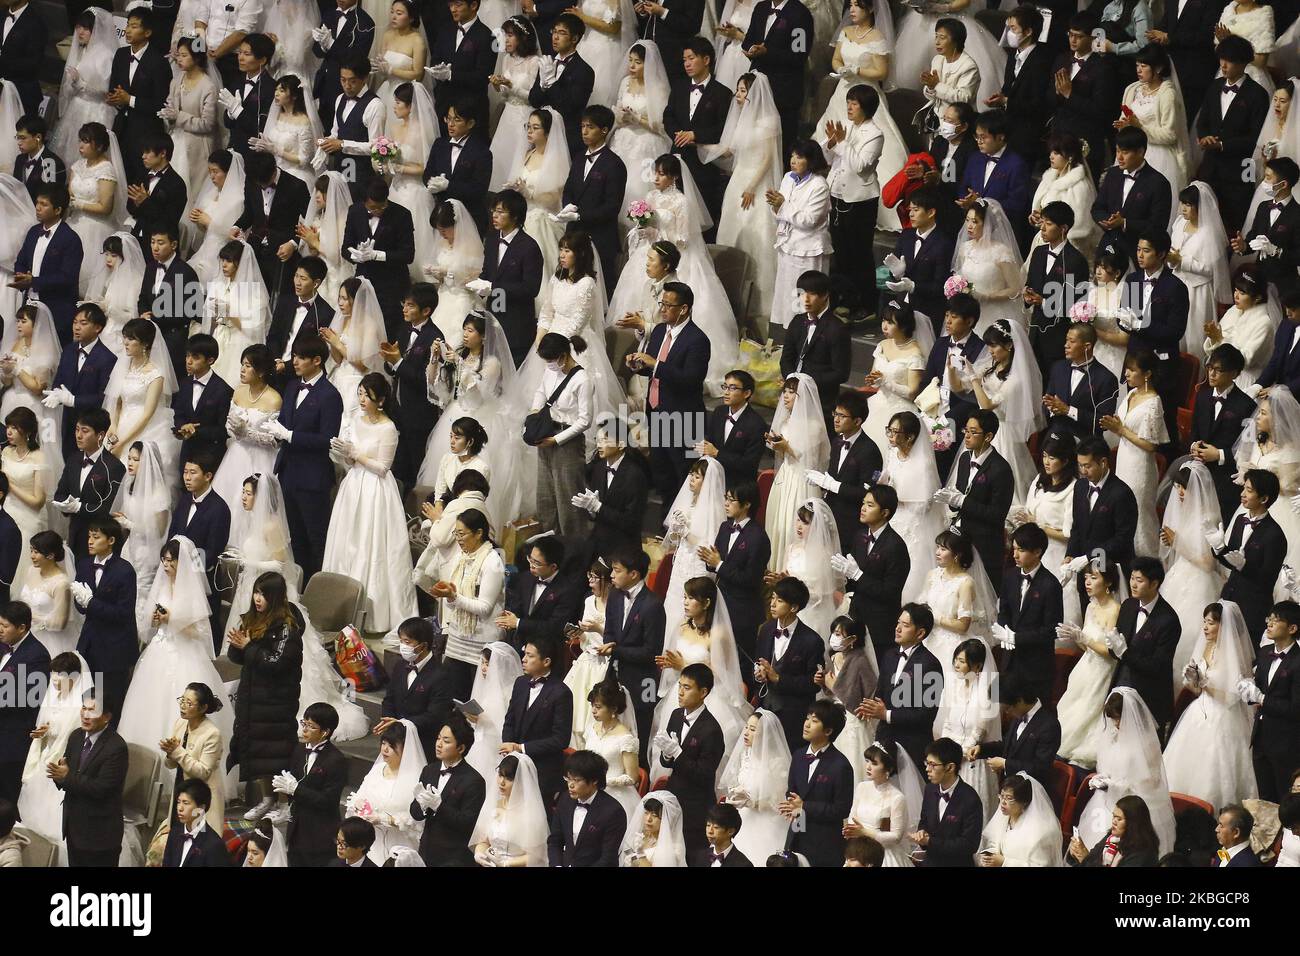 Thousands of couples take part in a mass wedding of the Family Federation for World Peace and Unification, commonly known as the Unification Church, at Cheongshim Peace World Center in Gapyeong-gun, South Korea on 7 February 2020. (Photo by Seung-il Ryu/NurPhoto) Stock Photo